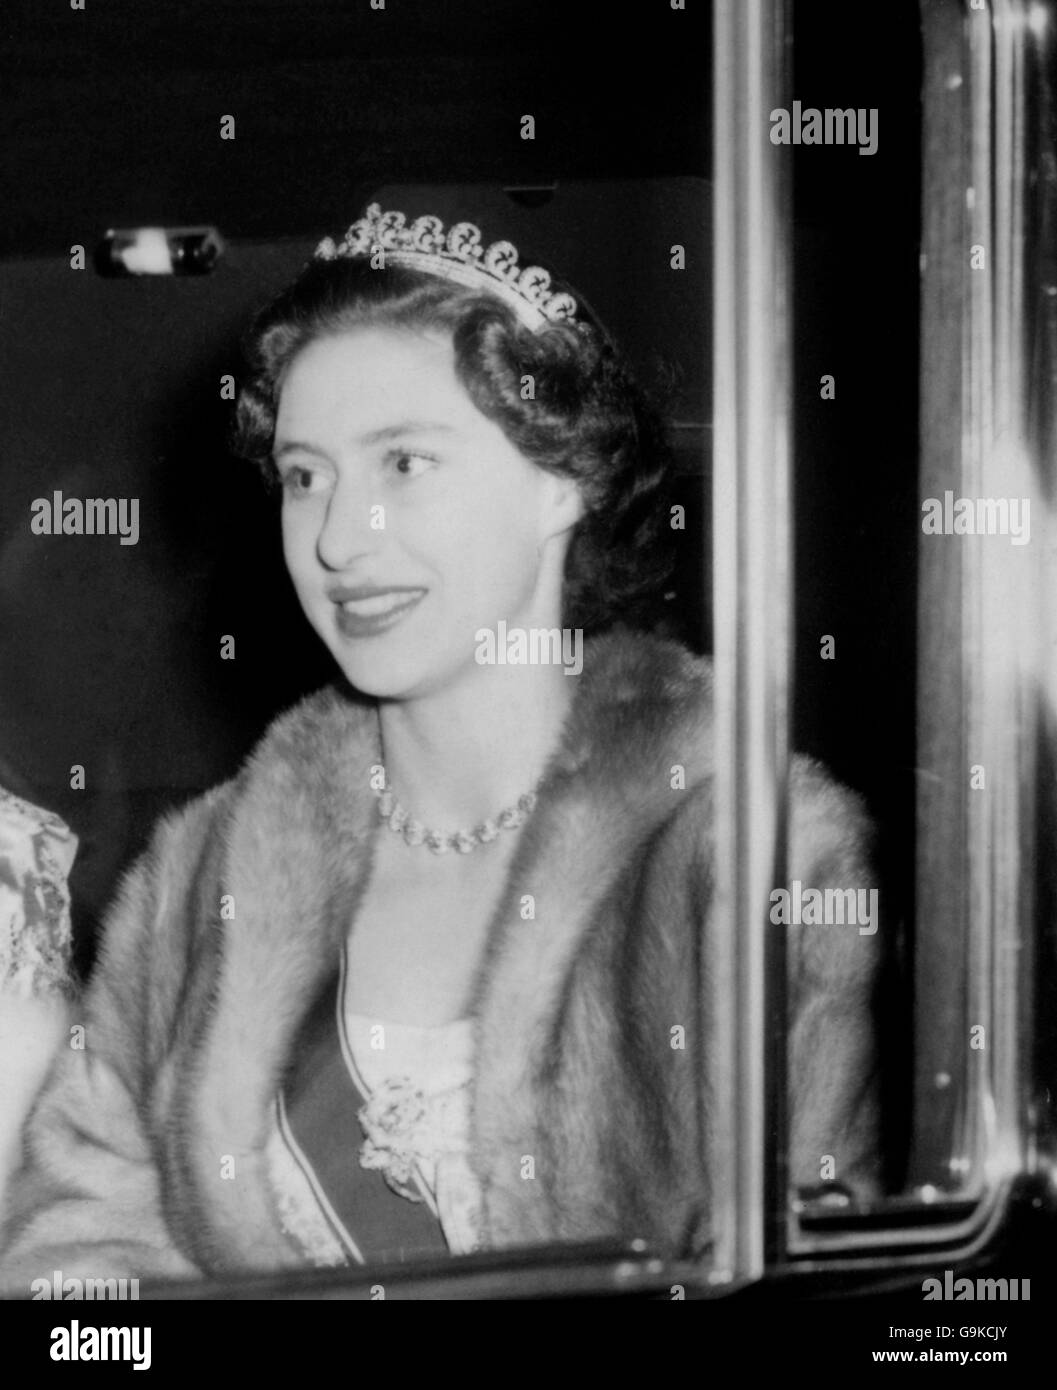 Princess Margaret drives from Clarence House to Buckingham Palace to attend the State banquet given by the Queen for her quest, Emperor haile Selassie of Ethiopia. Stock Photo